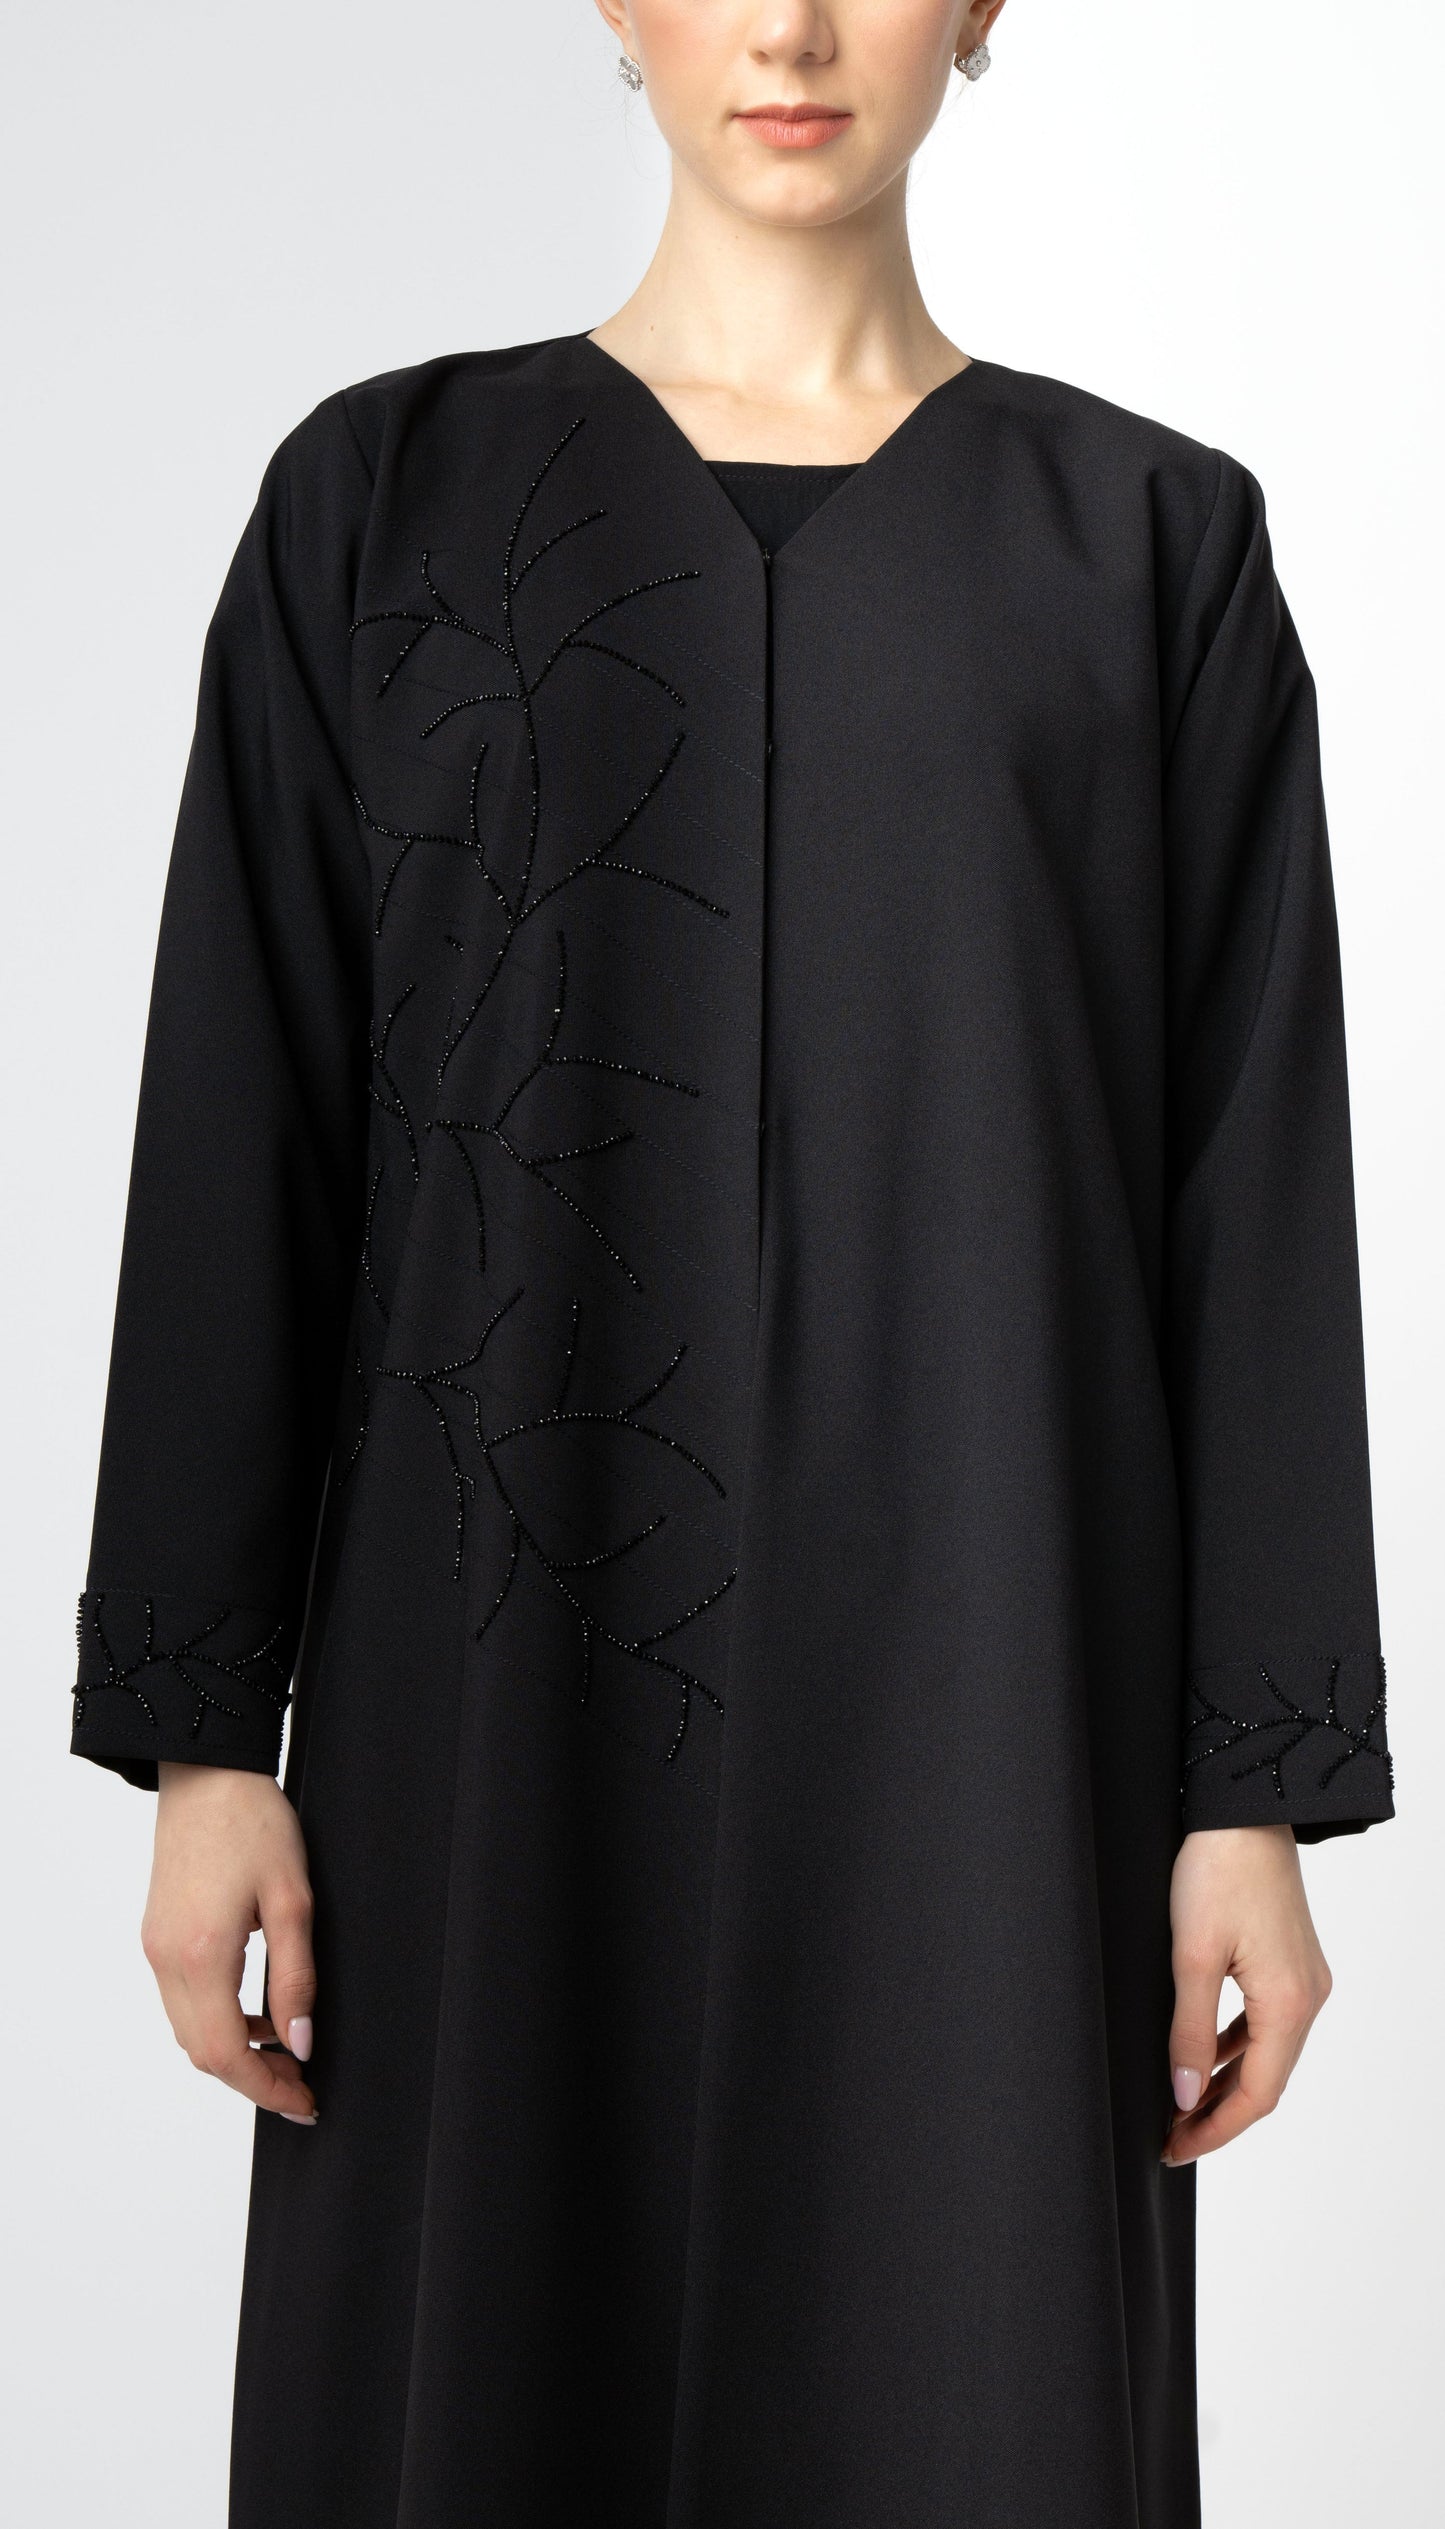 V-Neck Abaya With Stich Line And Embellishment On Front